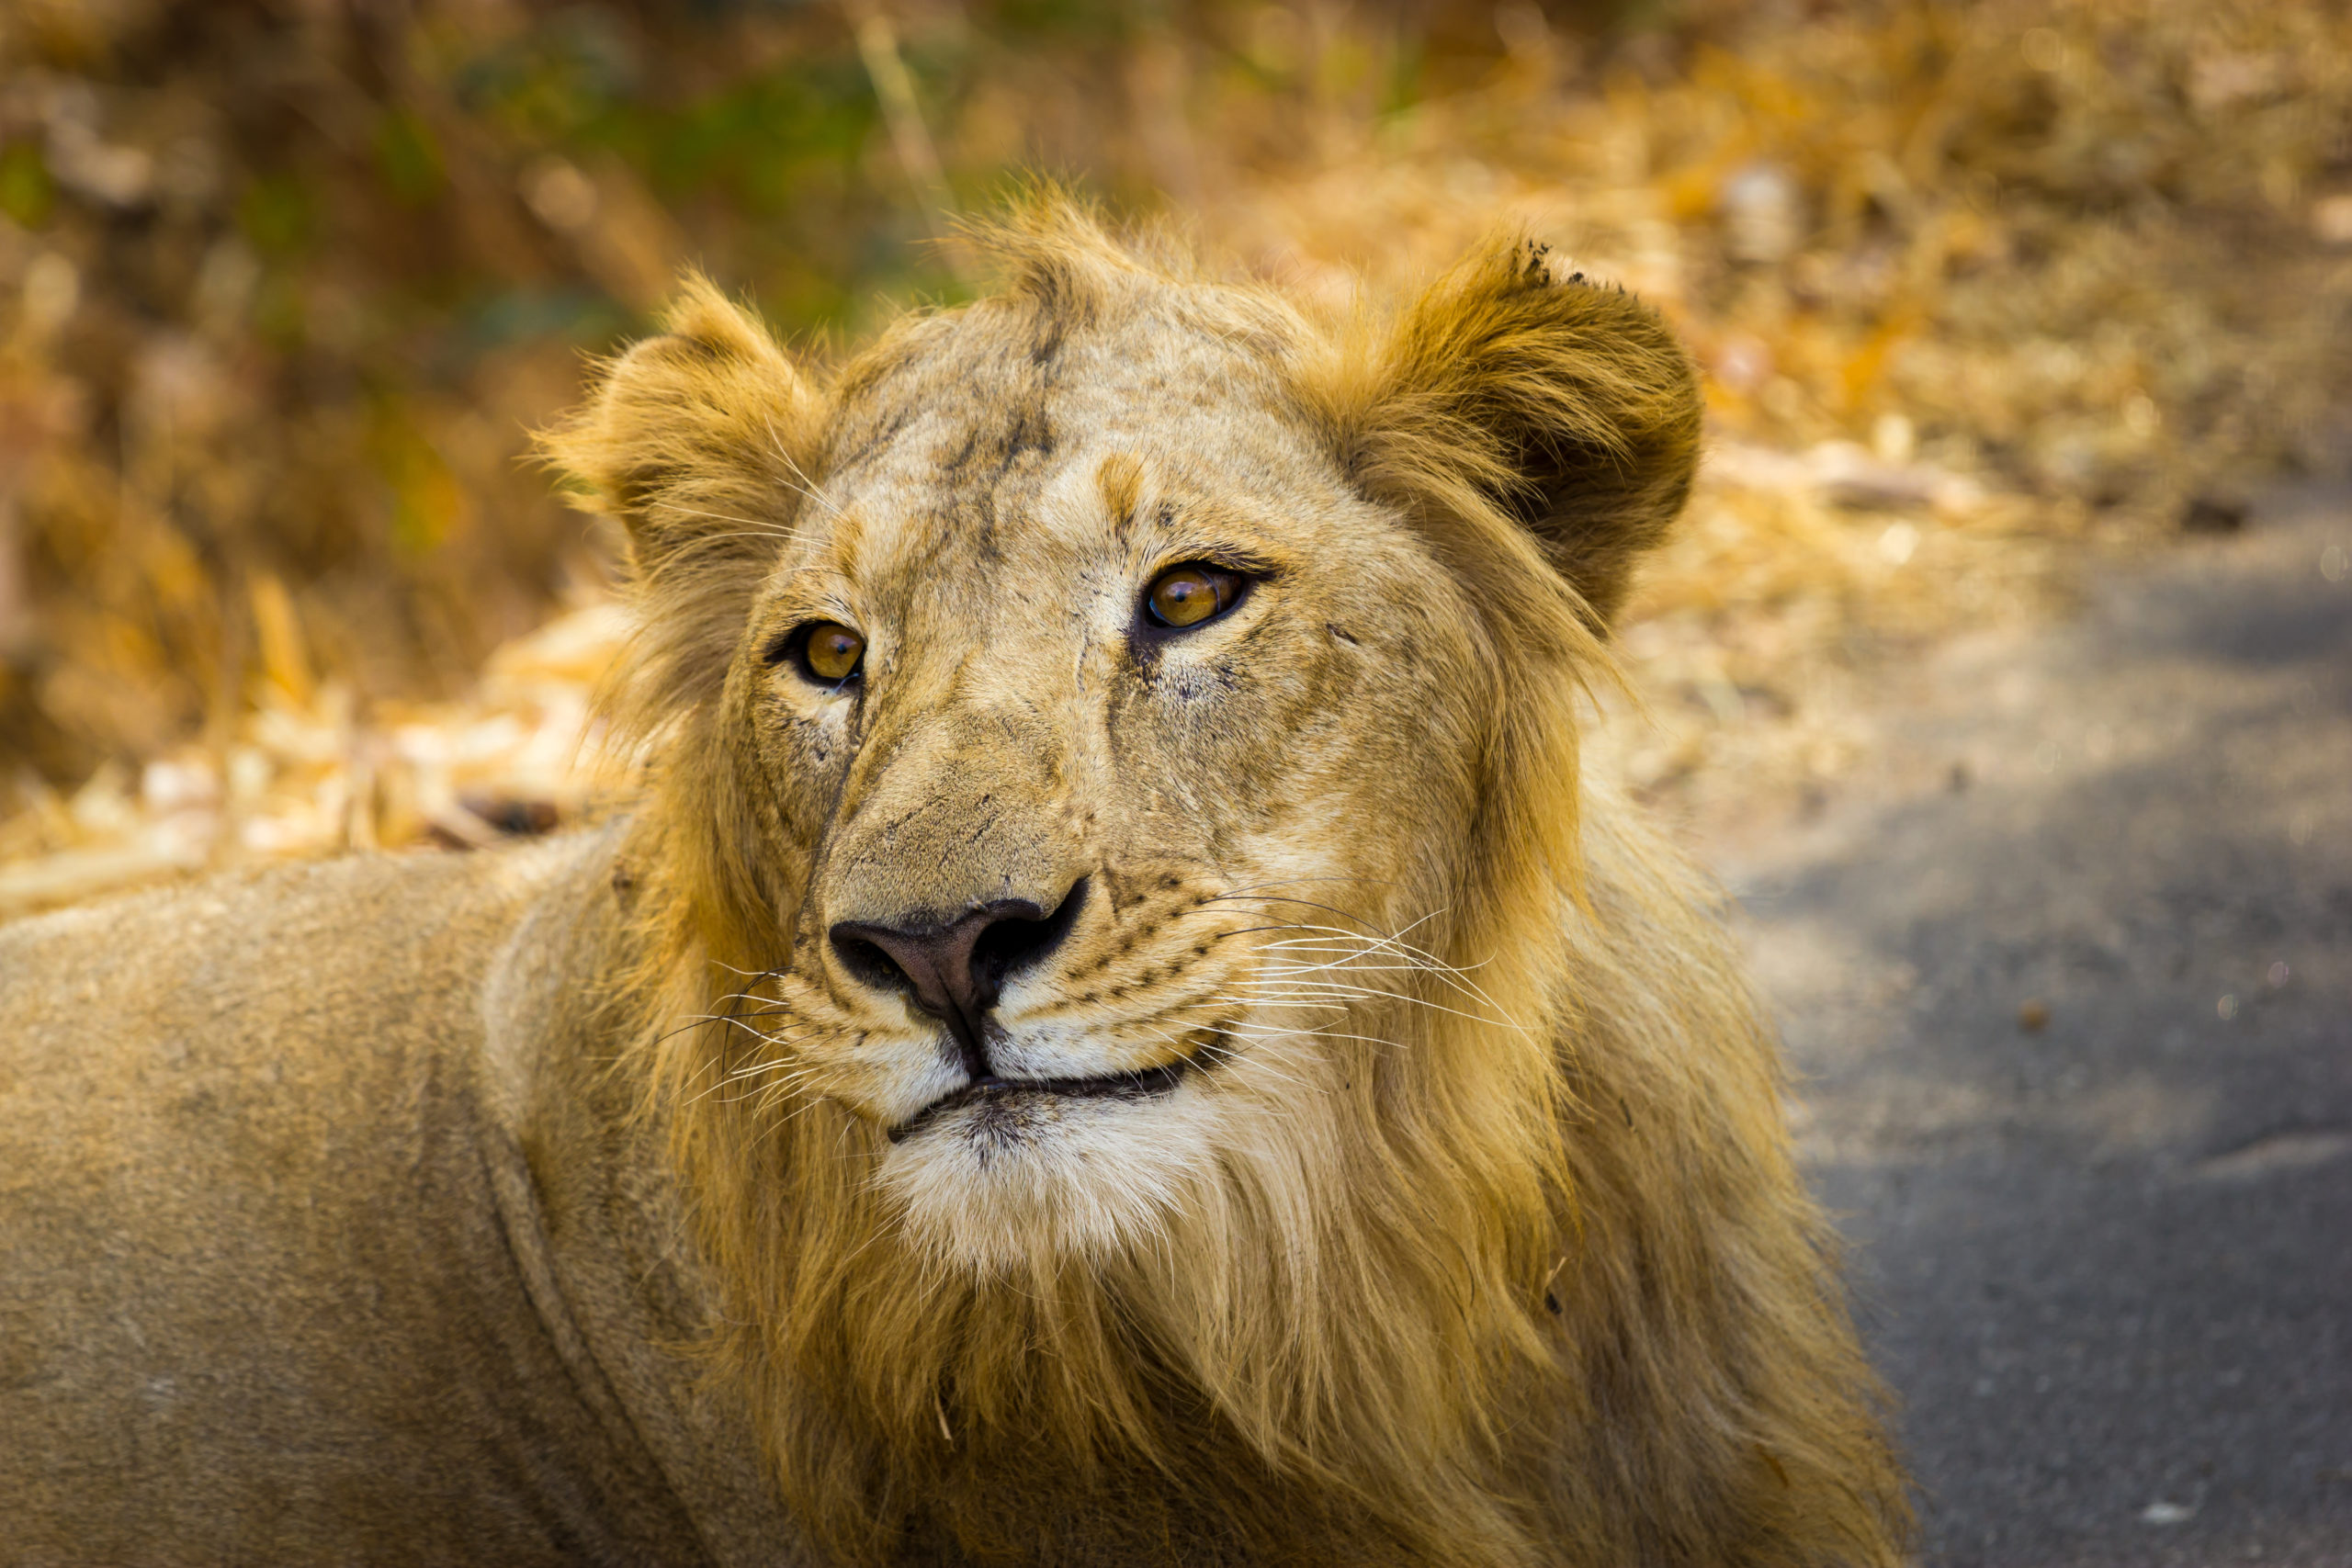 Asiatic Lion: India’s conservation success story